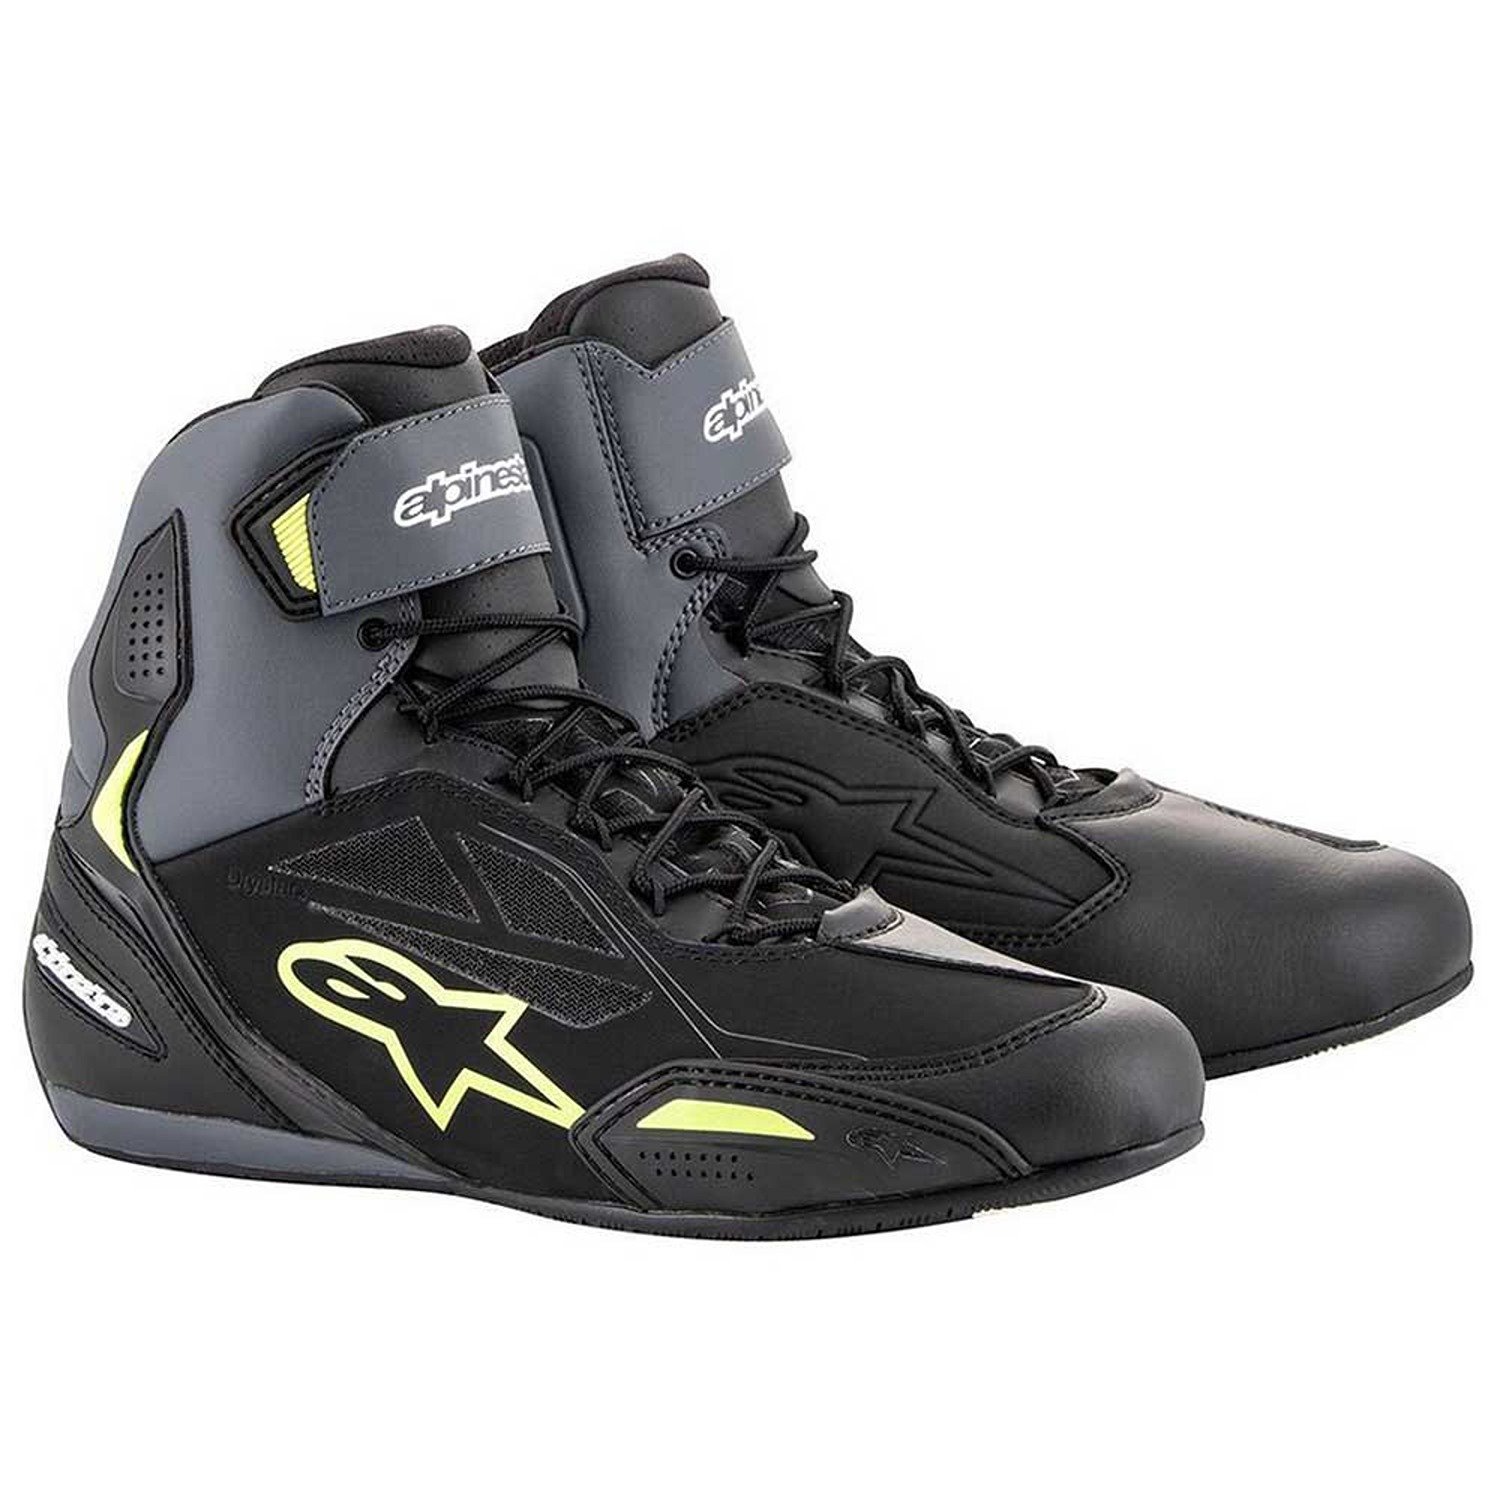 Image of EU Alpinestars Faster-3 Shoes Black Yellow Fluo Taille US 75